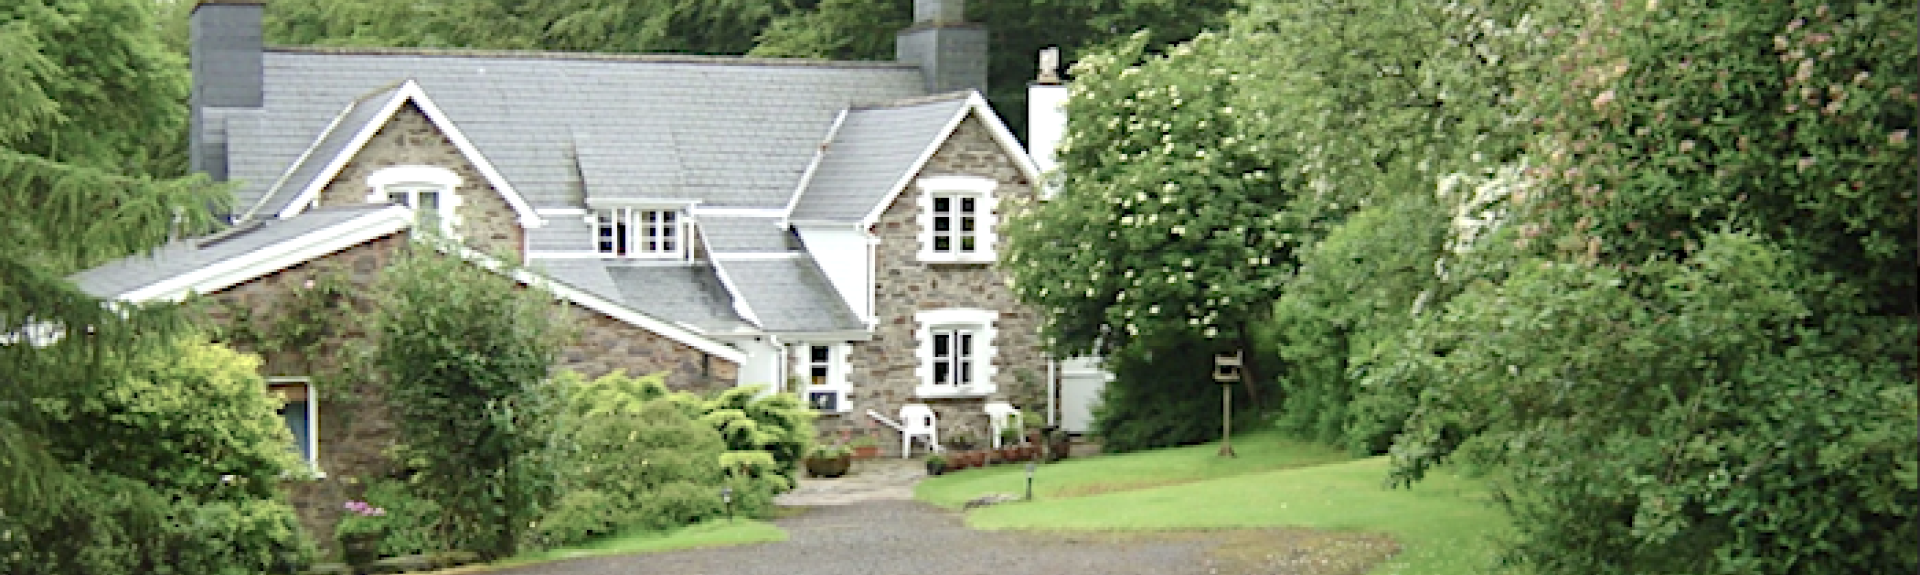 A sweeping drive approaches a twin-baled Exmoor cottage half-surrounded by mature trees.